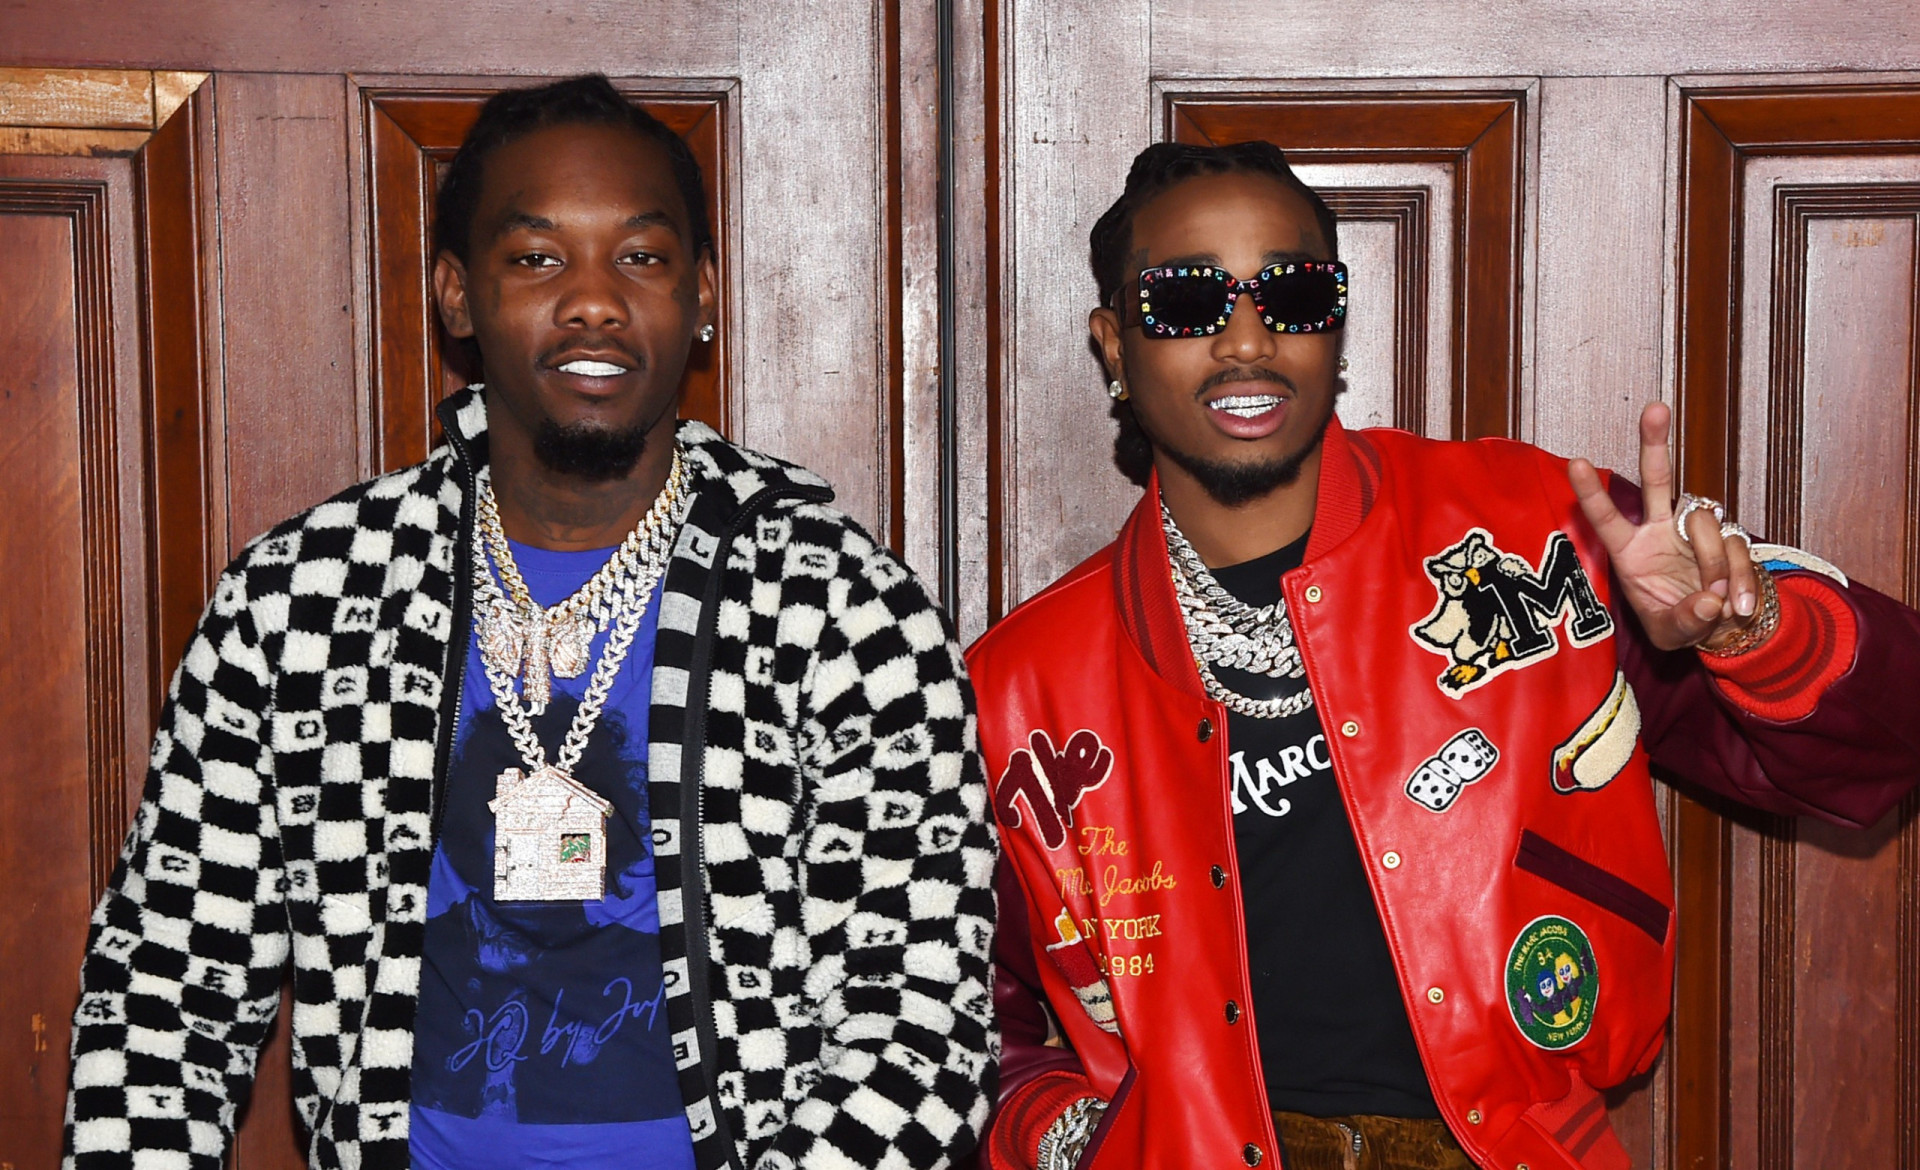 <p>Offset and Quavo of Migos were reportedly involved in a backstage altercation at the 2023 Grammys prior to a tribute performance honoring their late bandmate, Takeoff. The future of their rap trio is rumored to be uncertain. In a video obtained by Entertainment Tonight, Cardi B can be seen breaking up the fight and expressing her disapproval by yelling, "Both of y'all wrong. Both of y'all! This is not right." Cardi added, "you shouldn’t have been talking.” Sources revealed that the dispute revolved around the execution of the tribute, with TMZ reporting that Quavo supposedly declined to include Offset in the performance, despite the Recording Academy’s request for them to collaborate on stage.</p><p>You may also like:<a href="https://www.starsinsider.com/n/342622?utm_source=msn.com&utm_medium=display&utm_campaign=referral_description&utm_content=570915en-en"> Man-made marvels: The world's largest artificial islands </a></p>